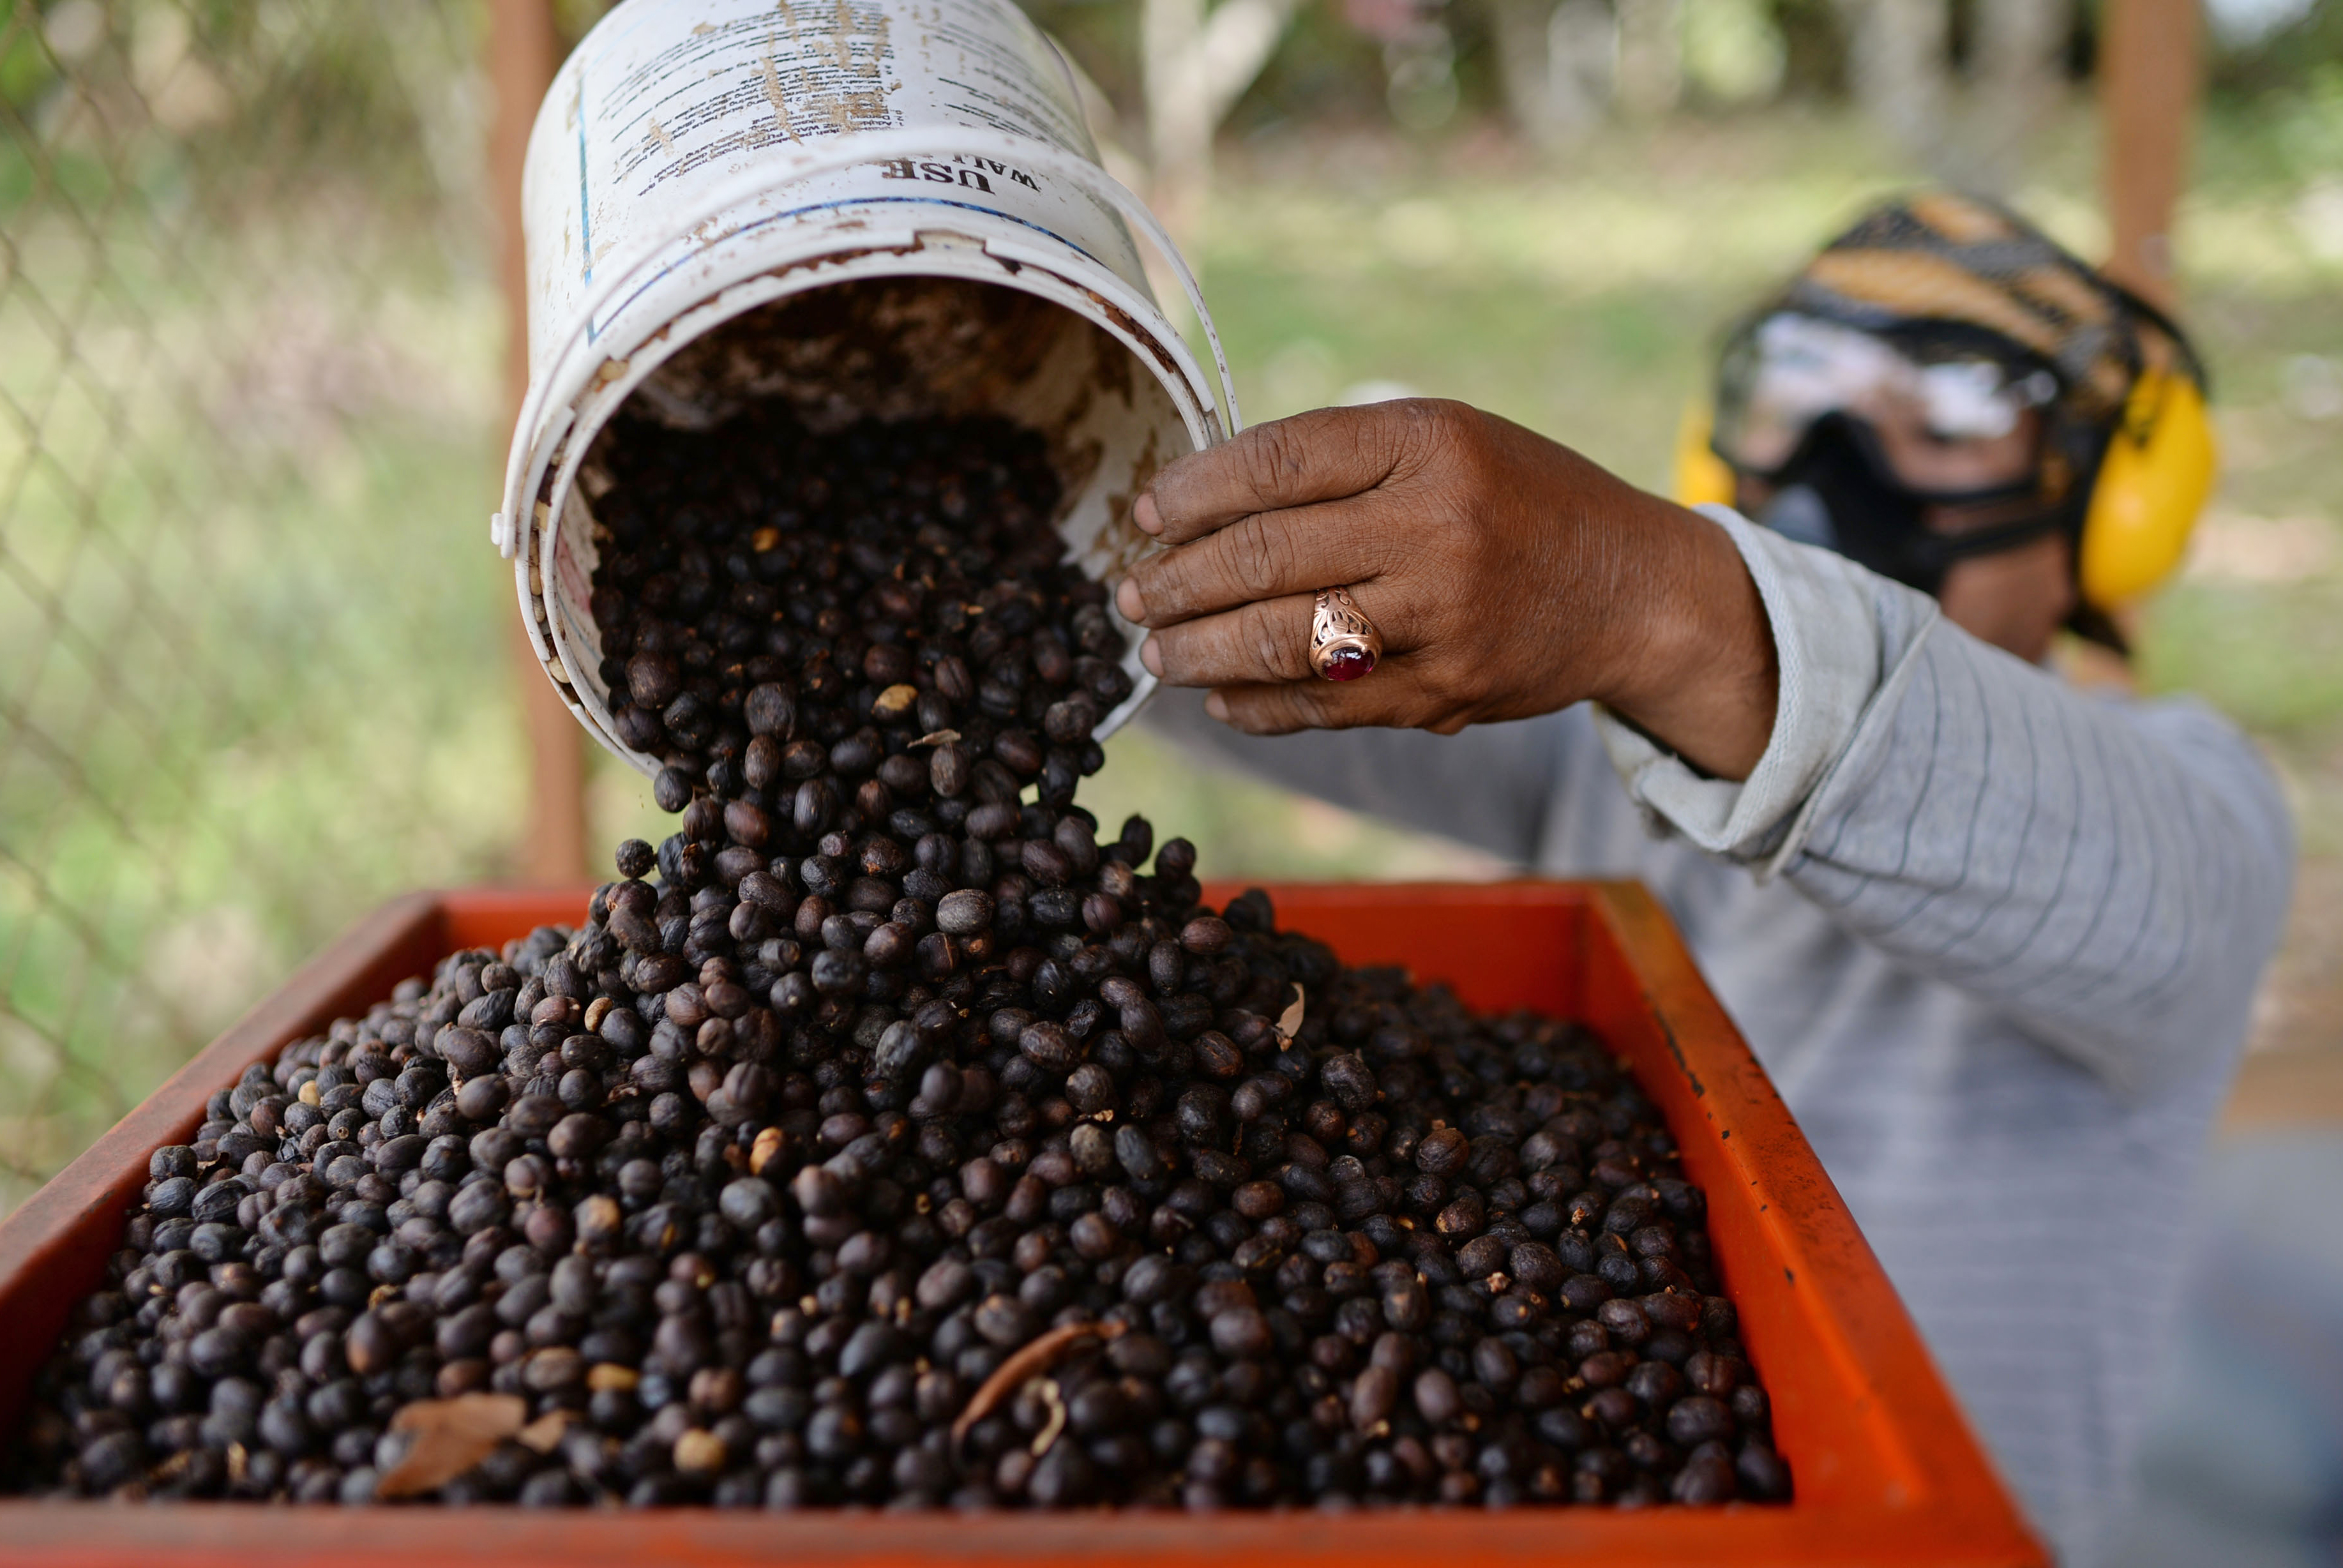 An employee pours Arabica coffee cherries into a peeling and grinding machine at the Solok Radjo Cooperative coffee farm in Alahan Panjang, West Sumatra, Indonesia, on Friday, July 15, 2016. Coffee production in Indonesia will probably drop 10 percent this year after dry weather caused by the worst El Nino in almost two decades damaged some crops and delayed the harvest. (Dimas Ardian/Bloomberg via Getty Images)